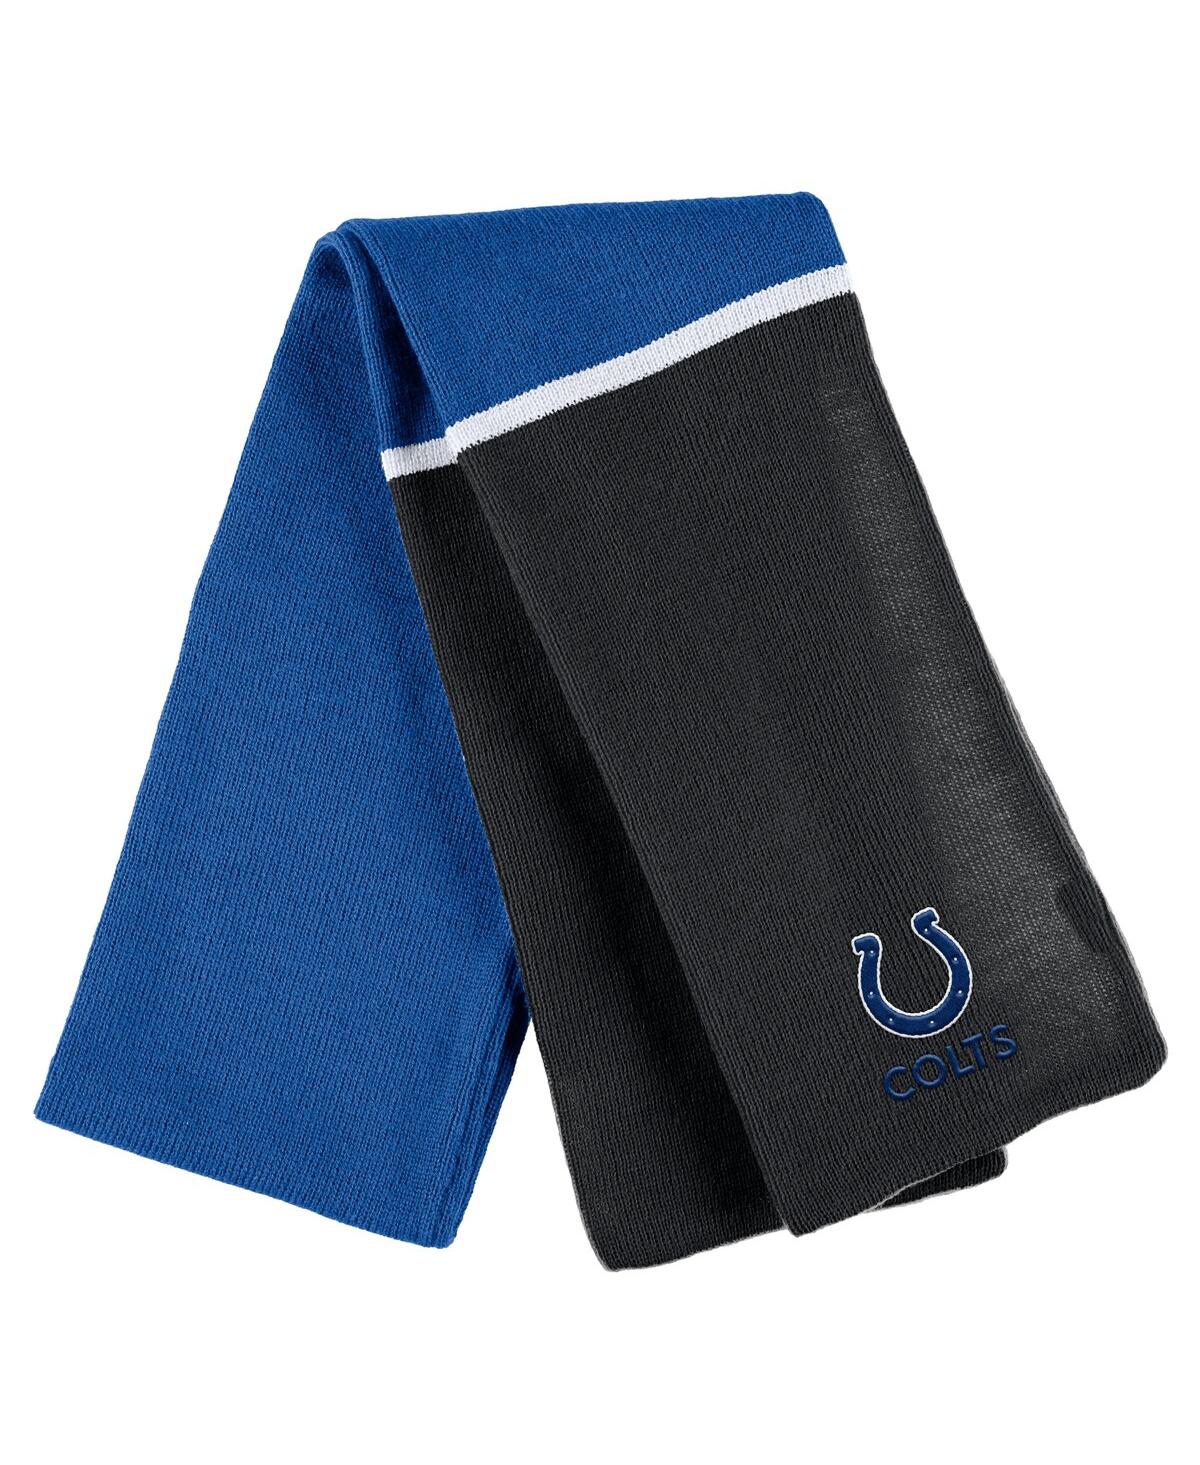 Shop Wear By Erin Andrews Women's  Royal Indianapolis Colts Colorblock Cuffed Knit Hat With Pom And Scarf